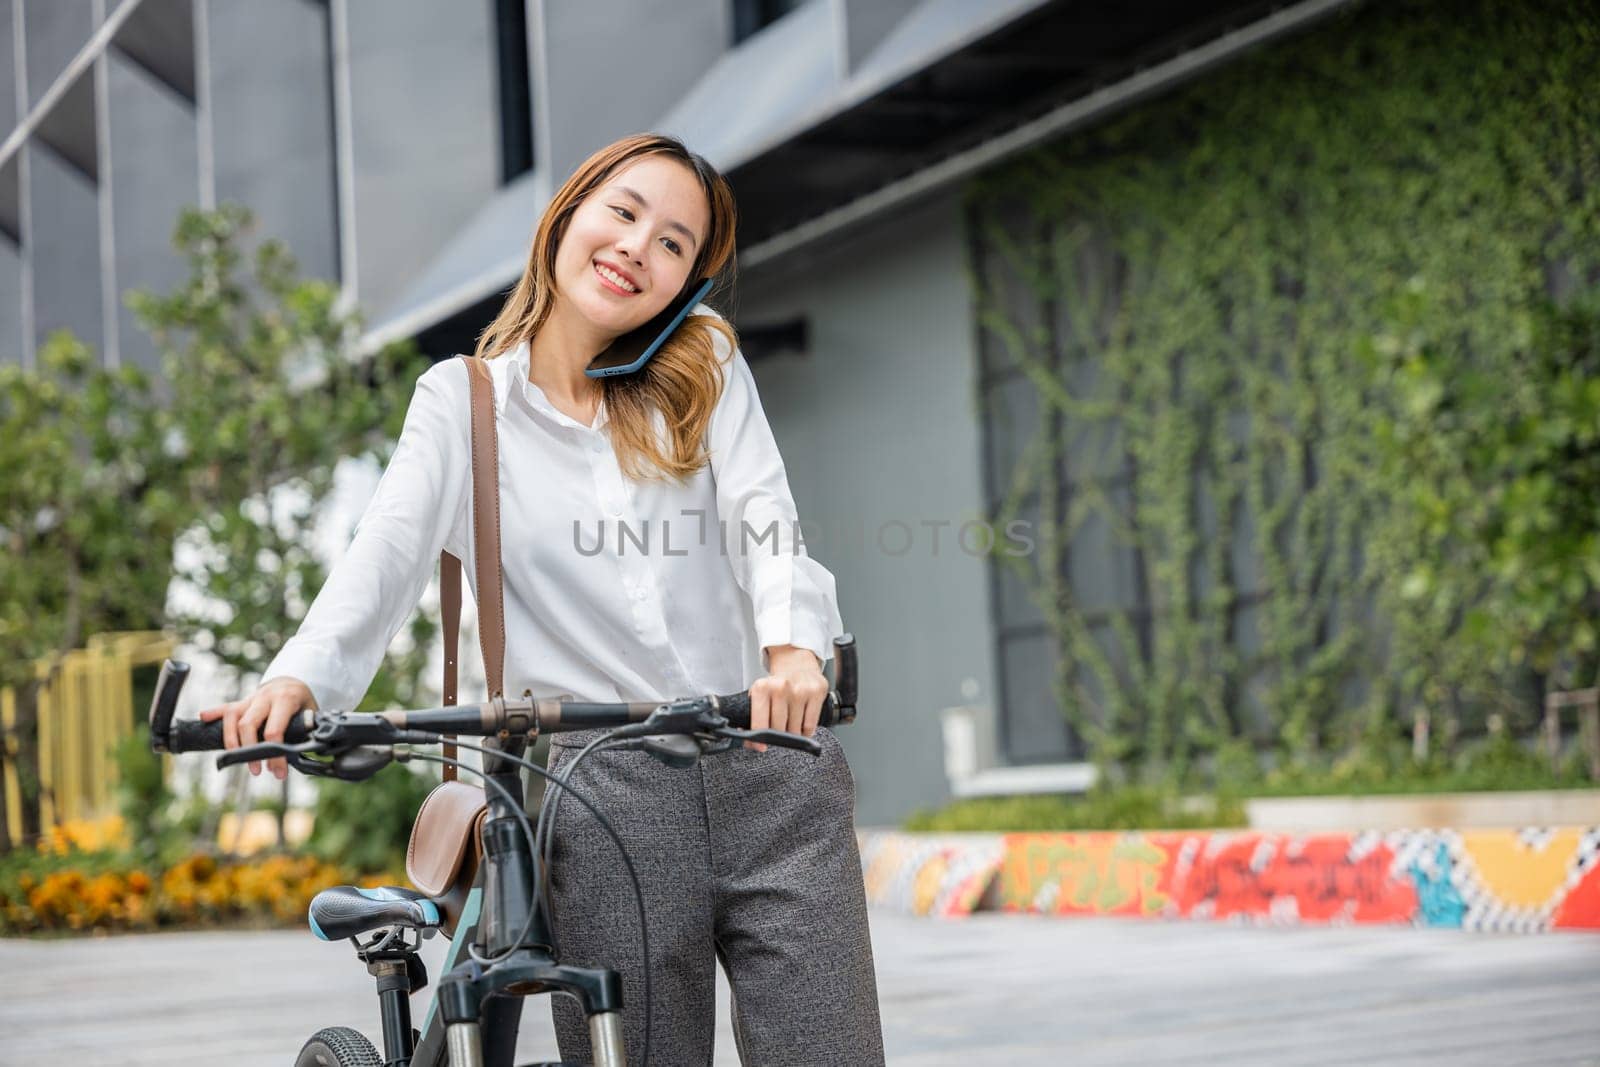 Amidst urban scenery a cheerful woman enjoys a bike ride while staying connected through her smartphone. The seamless blending of work joy and technology is evident in her expression. by Sorapop